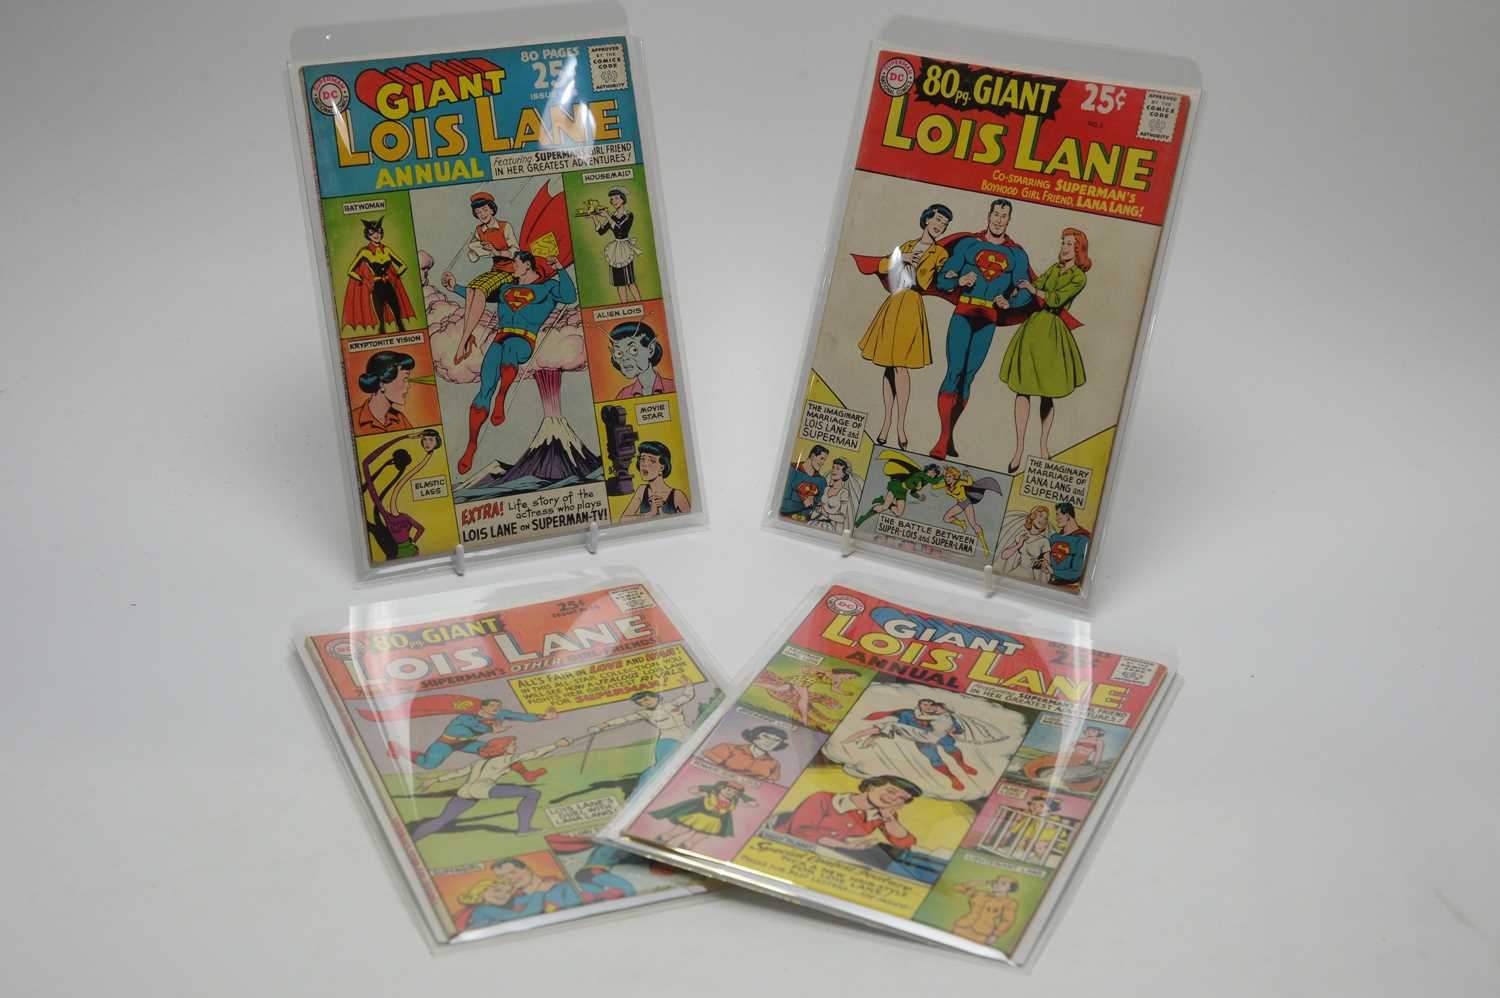 Lot 416 - DC 80 Page Giant, and Lois Lane Annual.